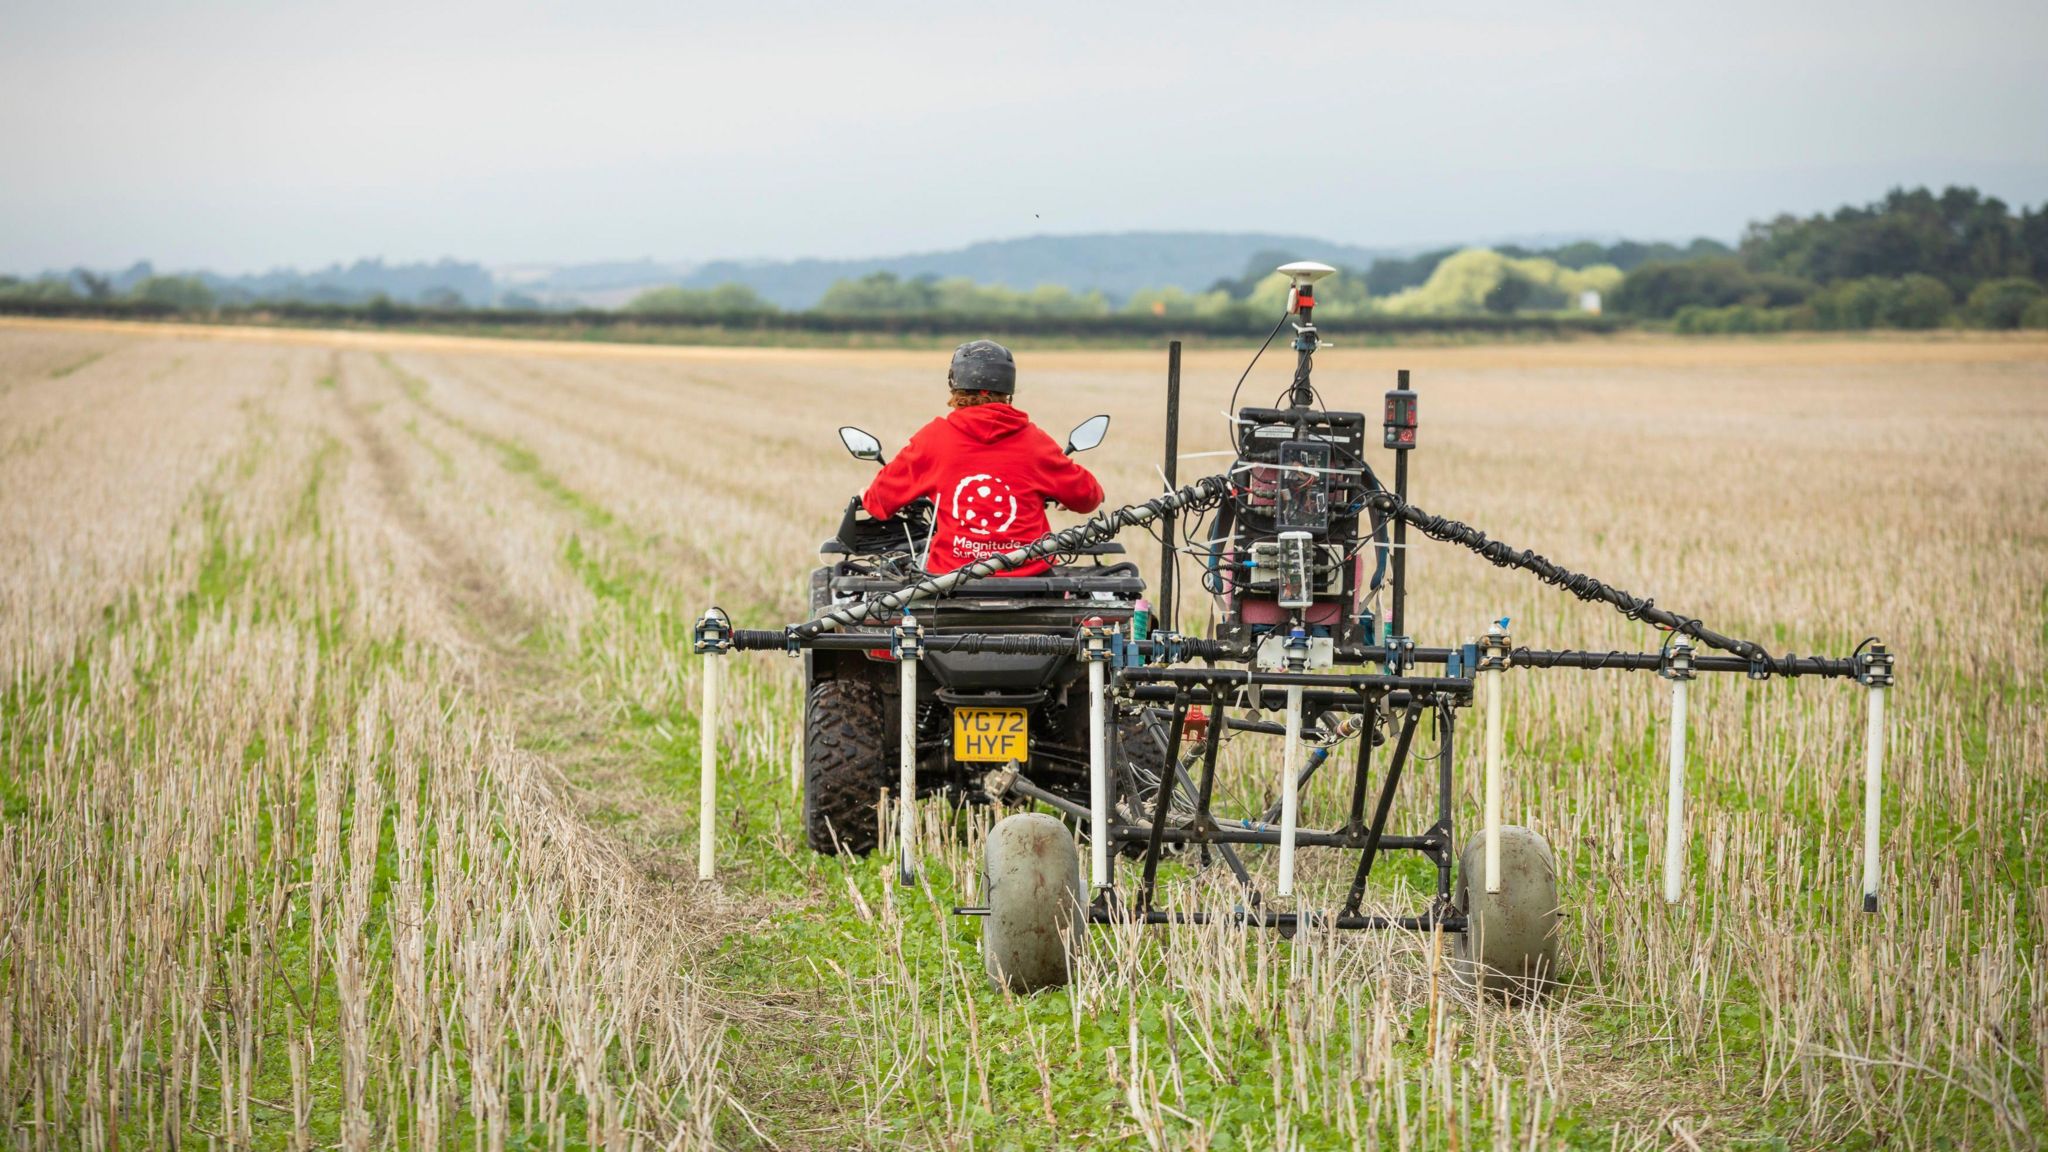 A person in a red top on a quad bike towing survey equipment across a field. The equipment is made up of several metal poles with some dangling over the field and mounted on two wheels.